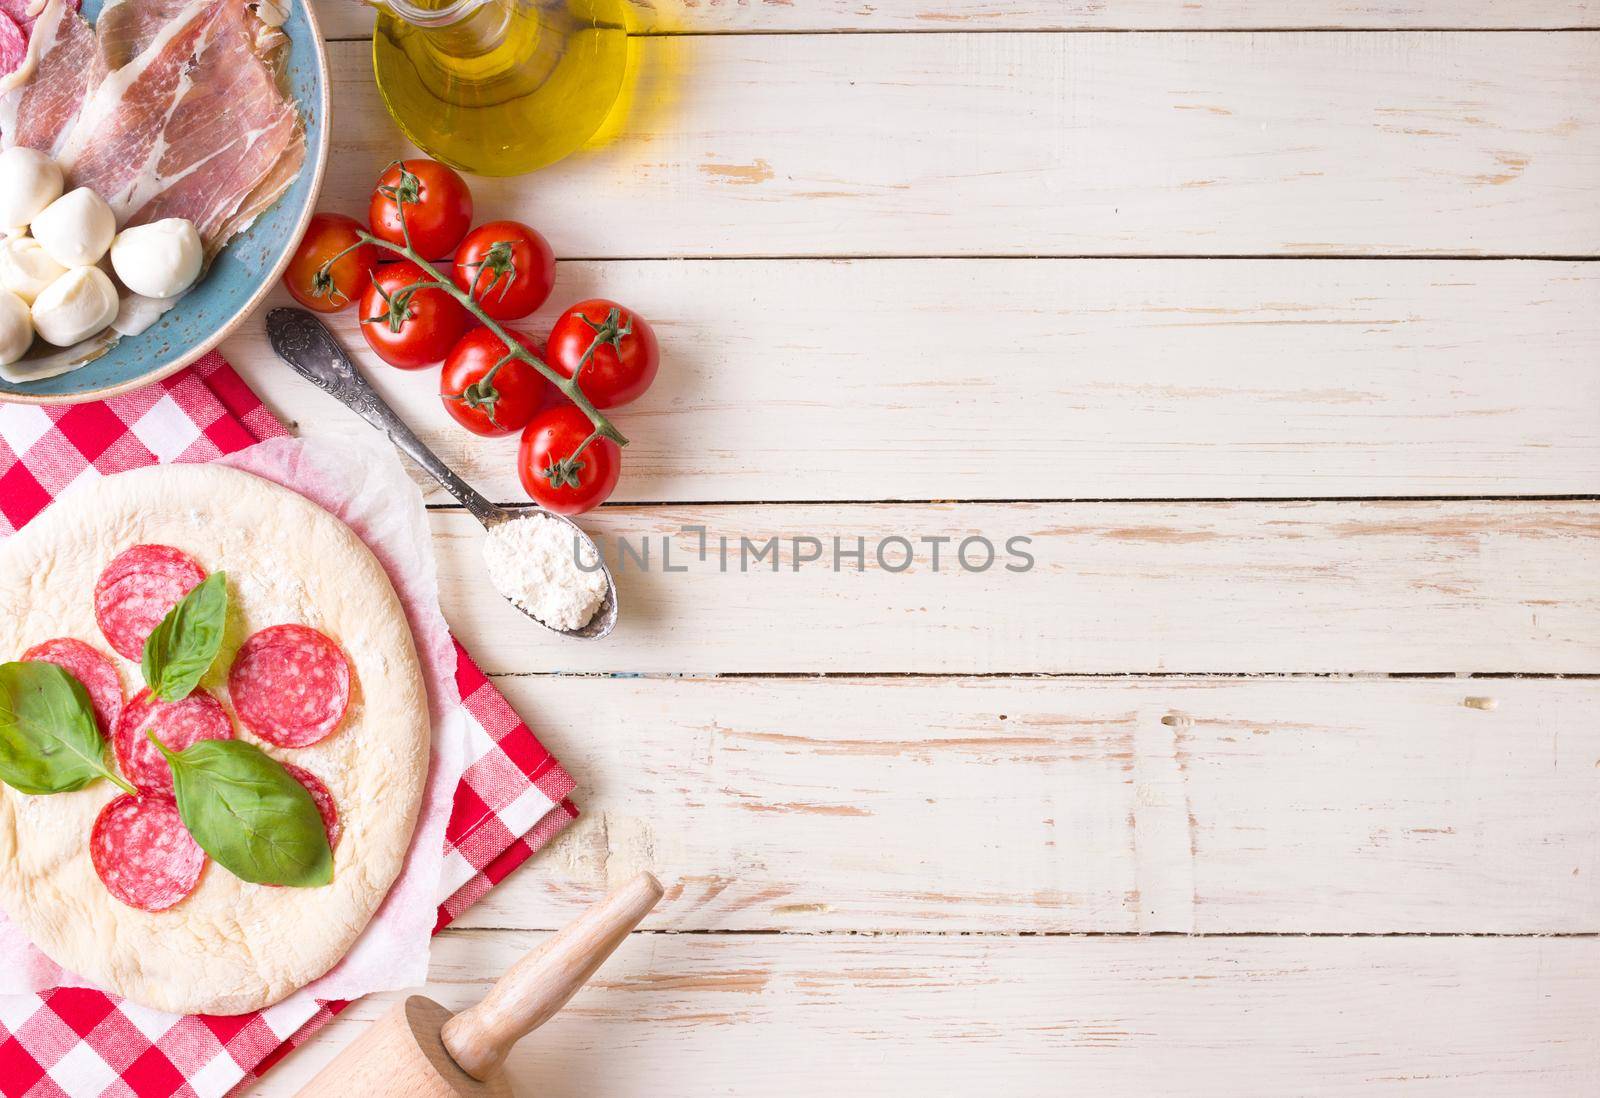 Pizza making background by its_al_dente